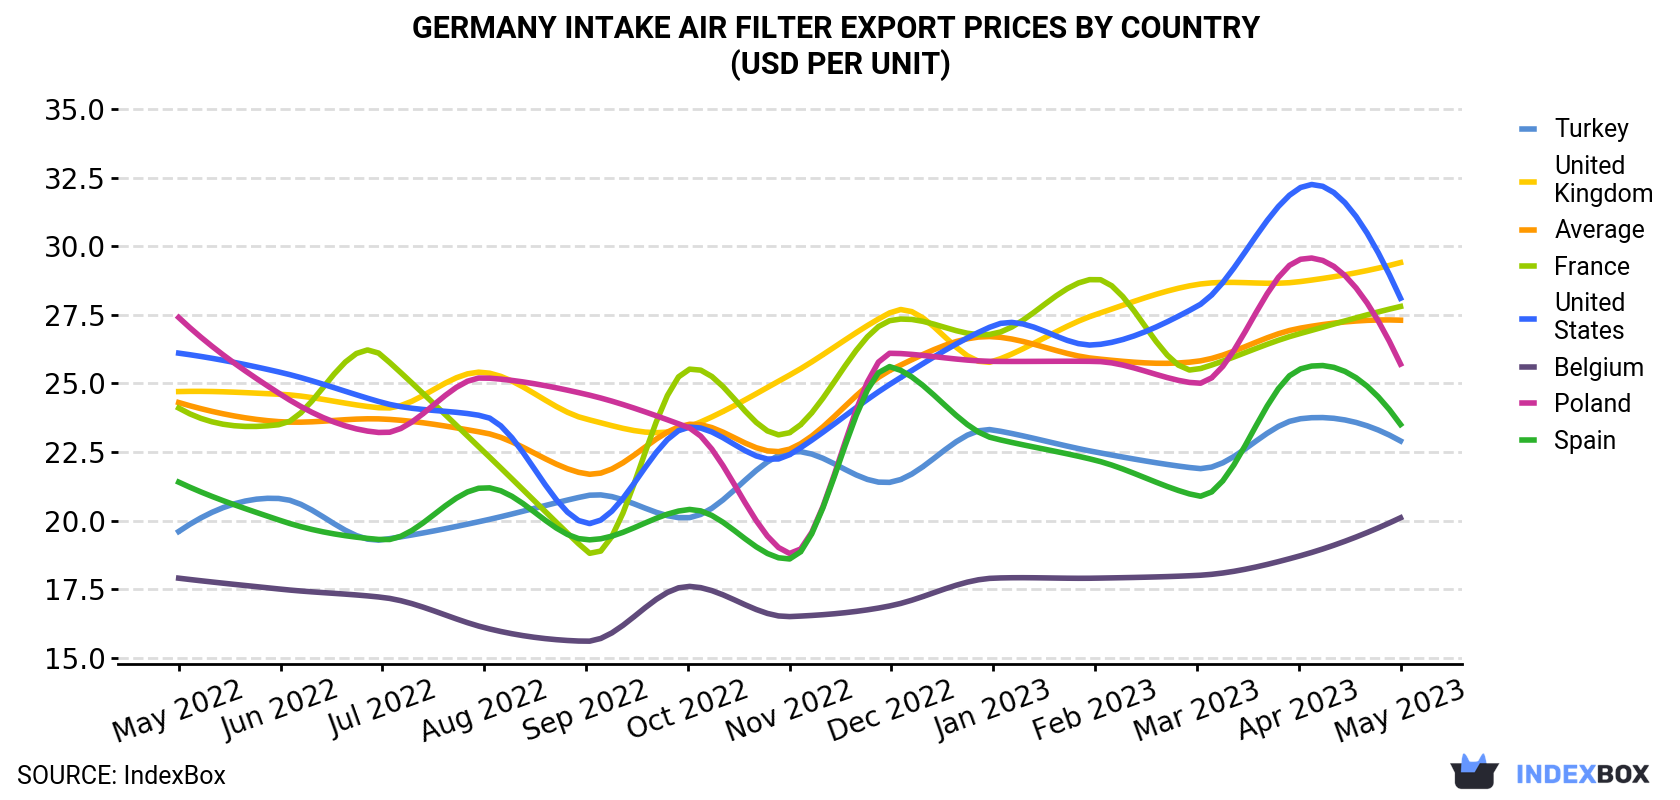 Germany Intake Air Filter Export Prices By Country (USD Per Unit)